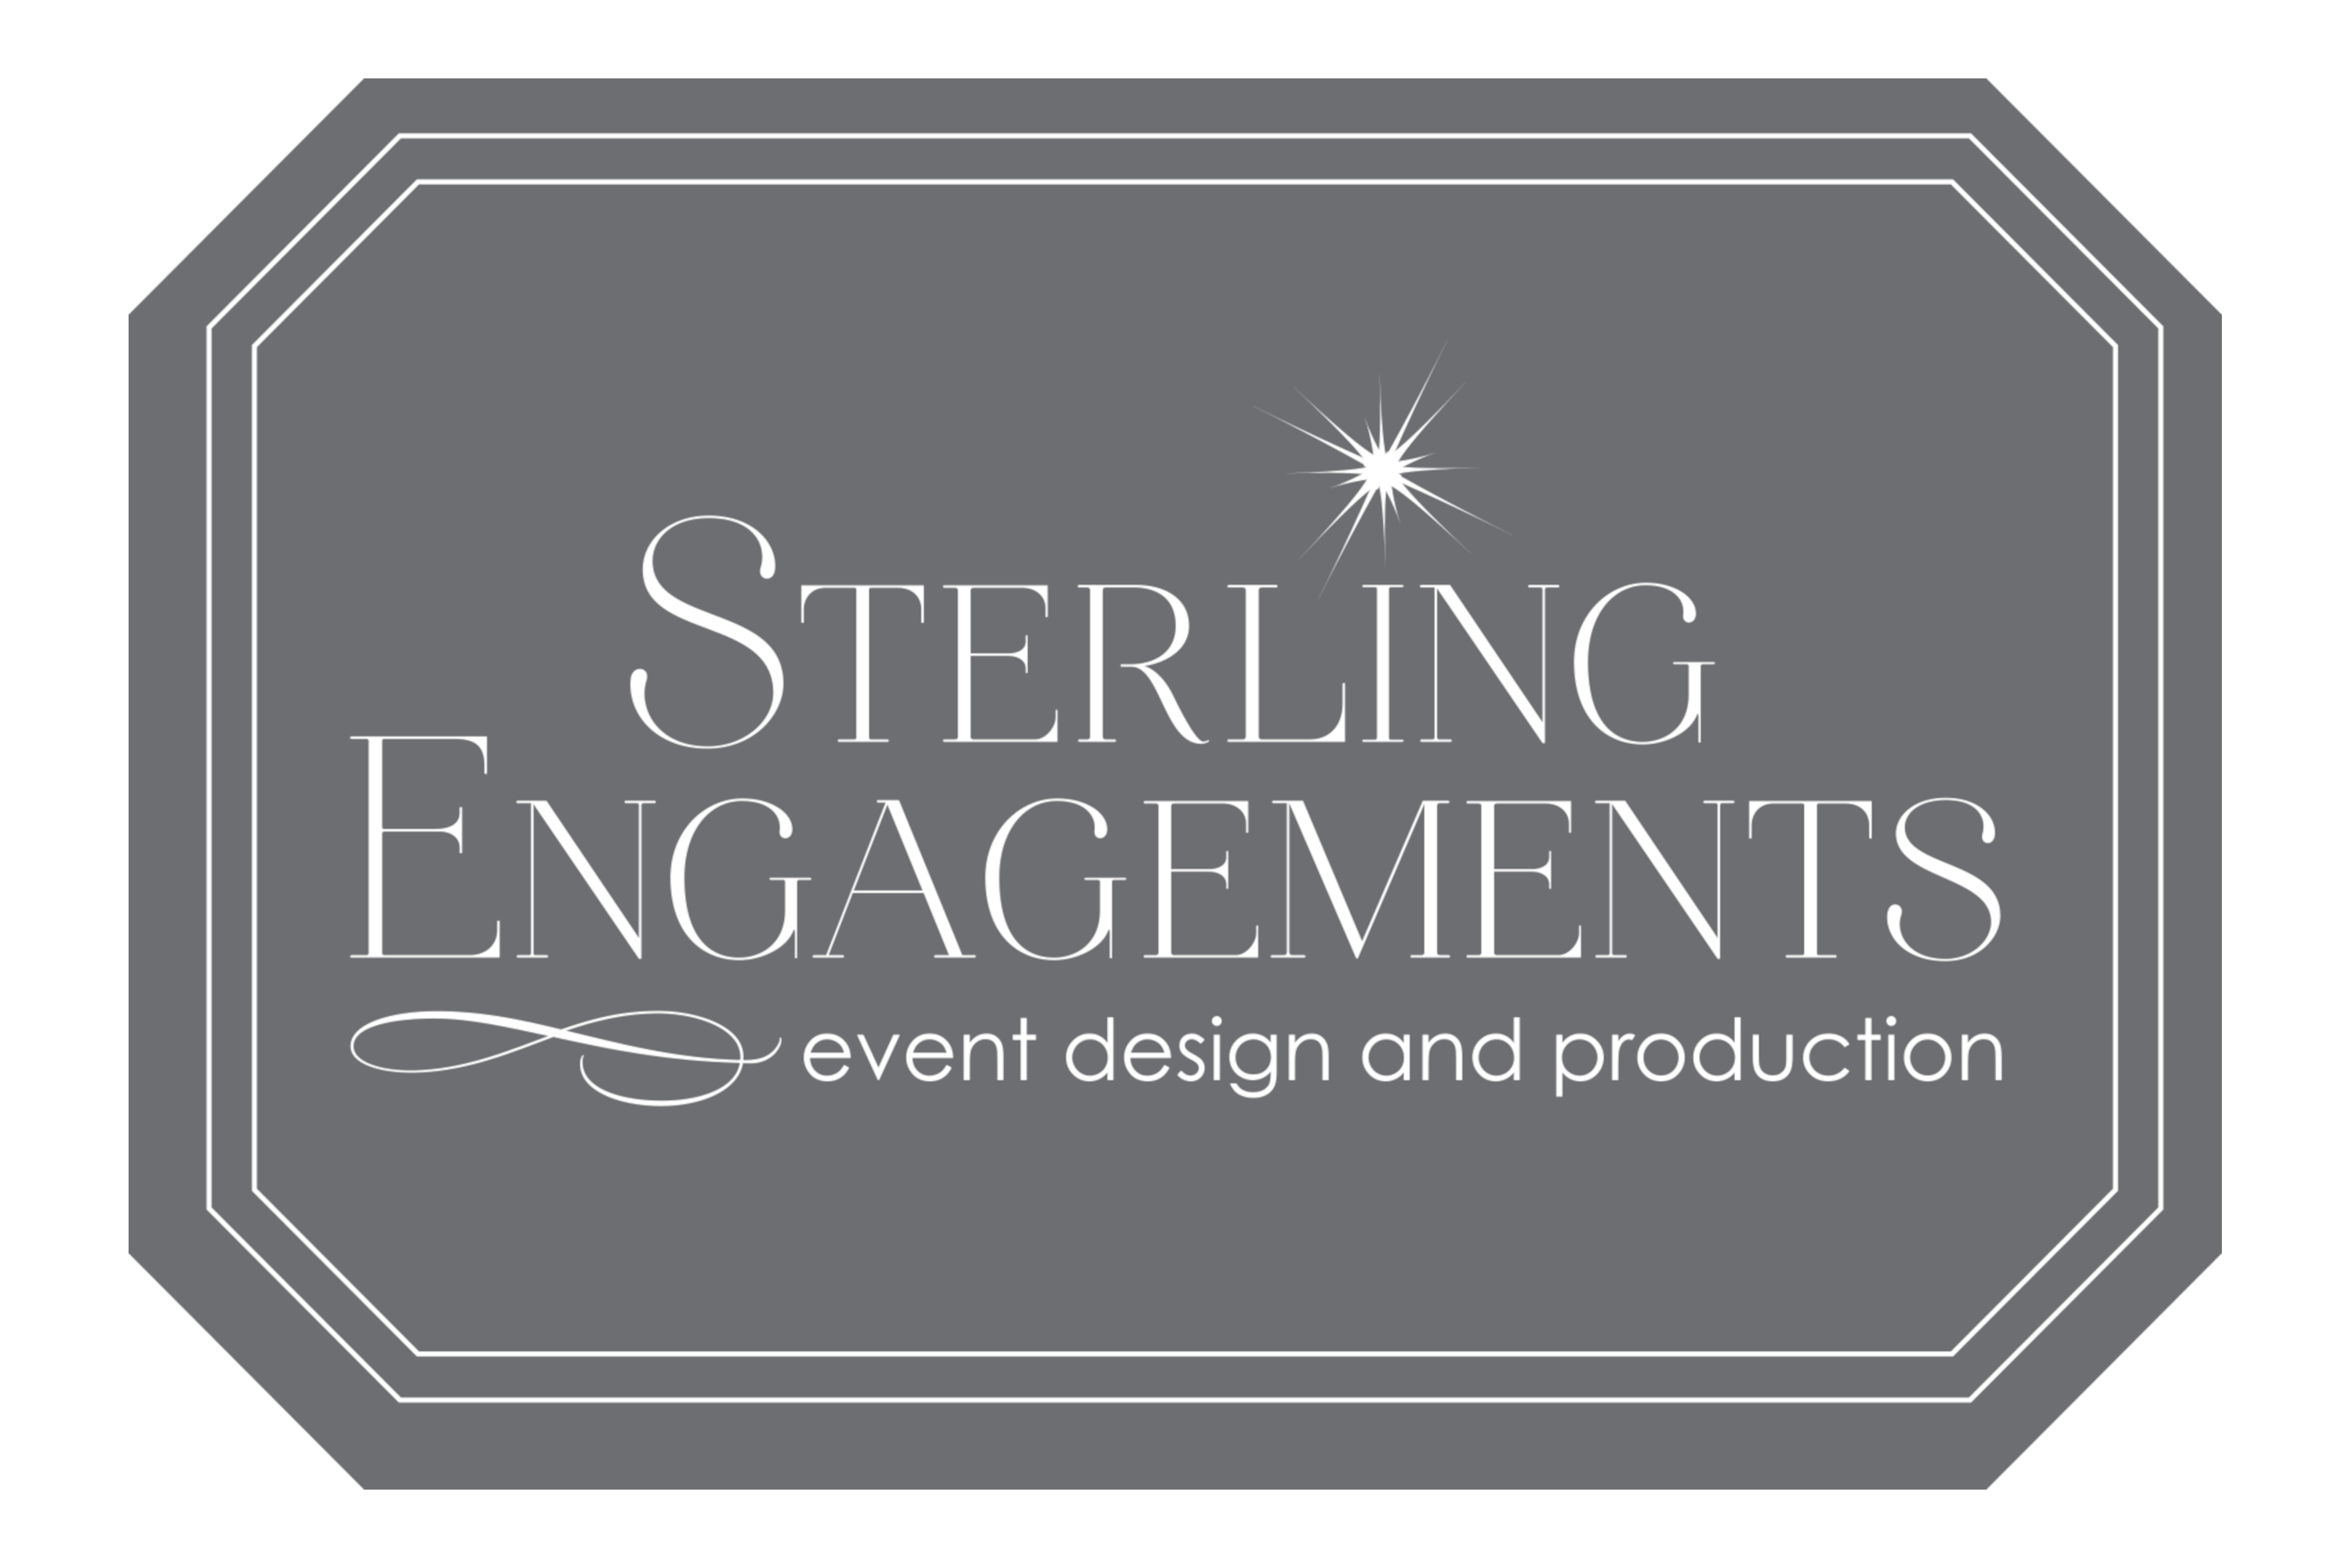 Sterling Engagements Event Design and Production logo with grey background and white trim and accents